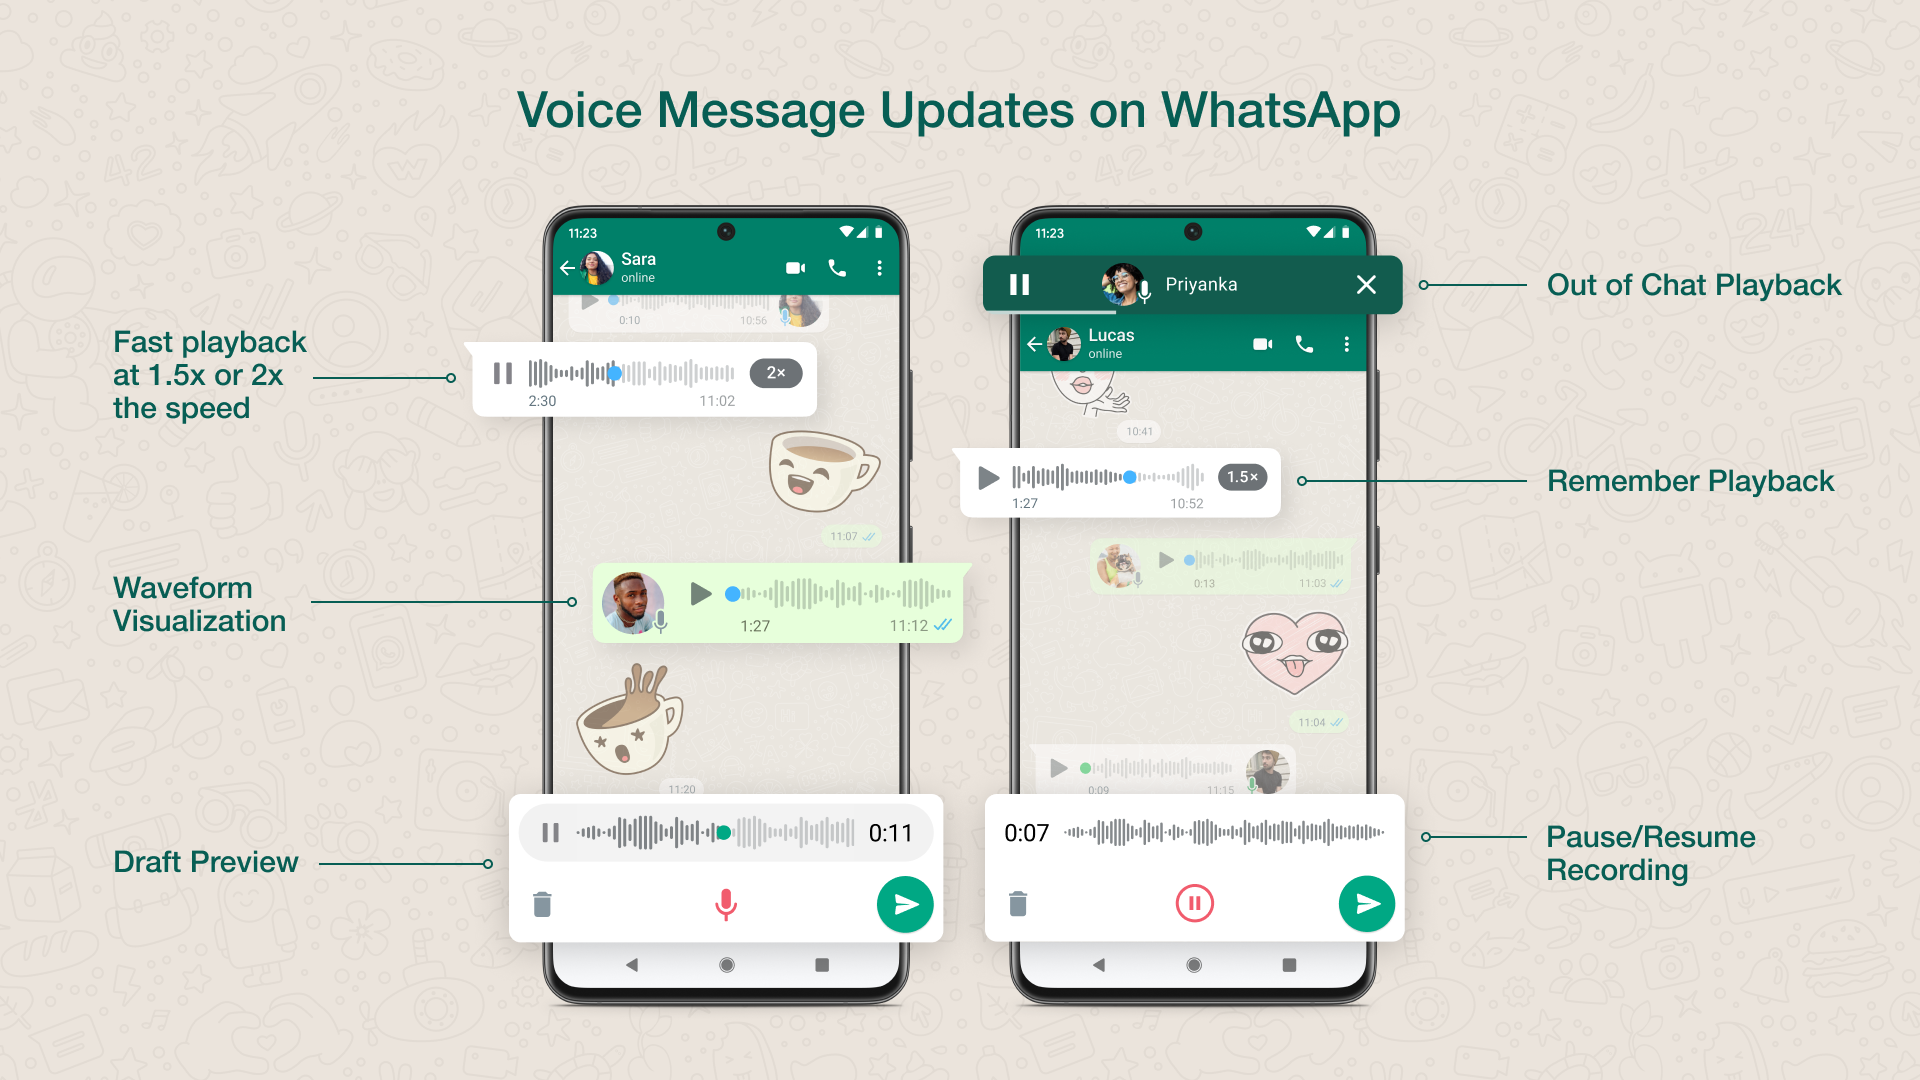 Voice Message Updates on WhatsApp. Adjustable playback, waveform visualization, draft preview, out of chat playback, remember playback, pause/resume recording.